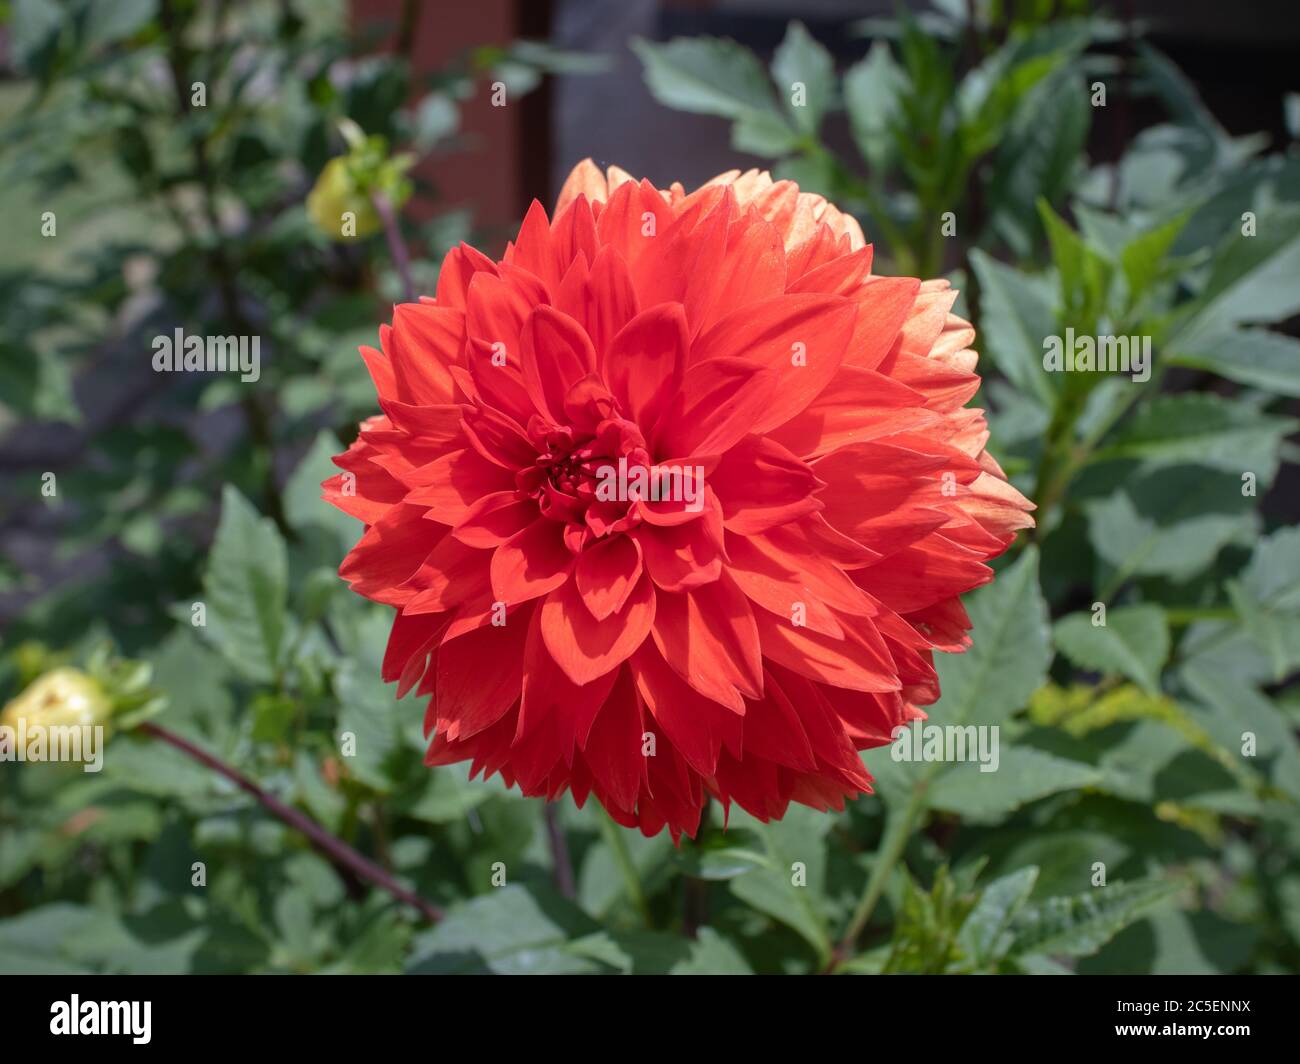 Large red flower of small petals, Dahlia pinnata, with green leafy background, Areal city, Rio de Janeiro state, Brazil Stock Photo